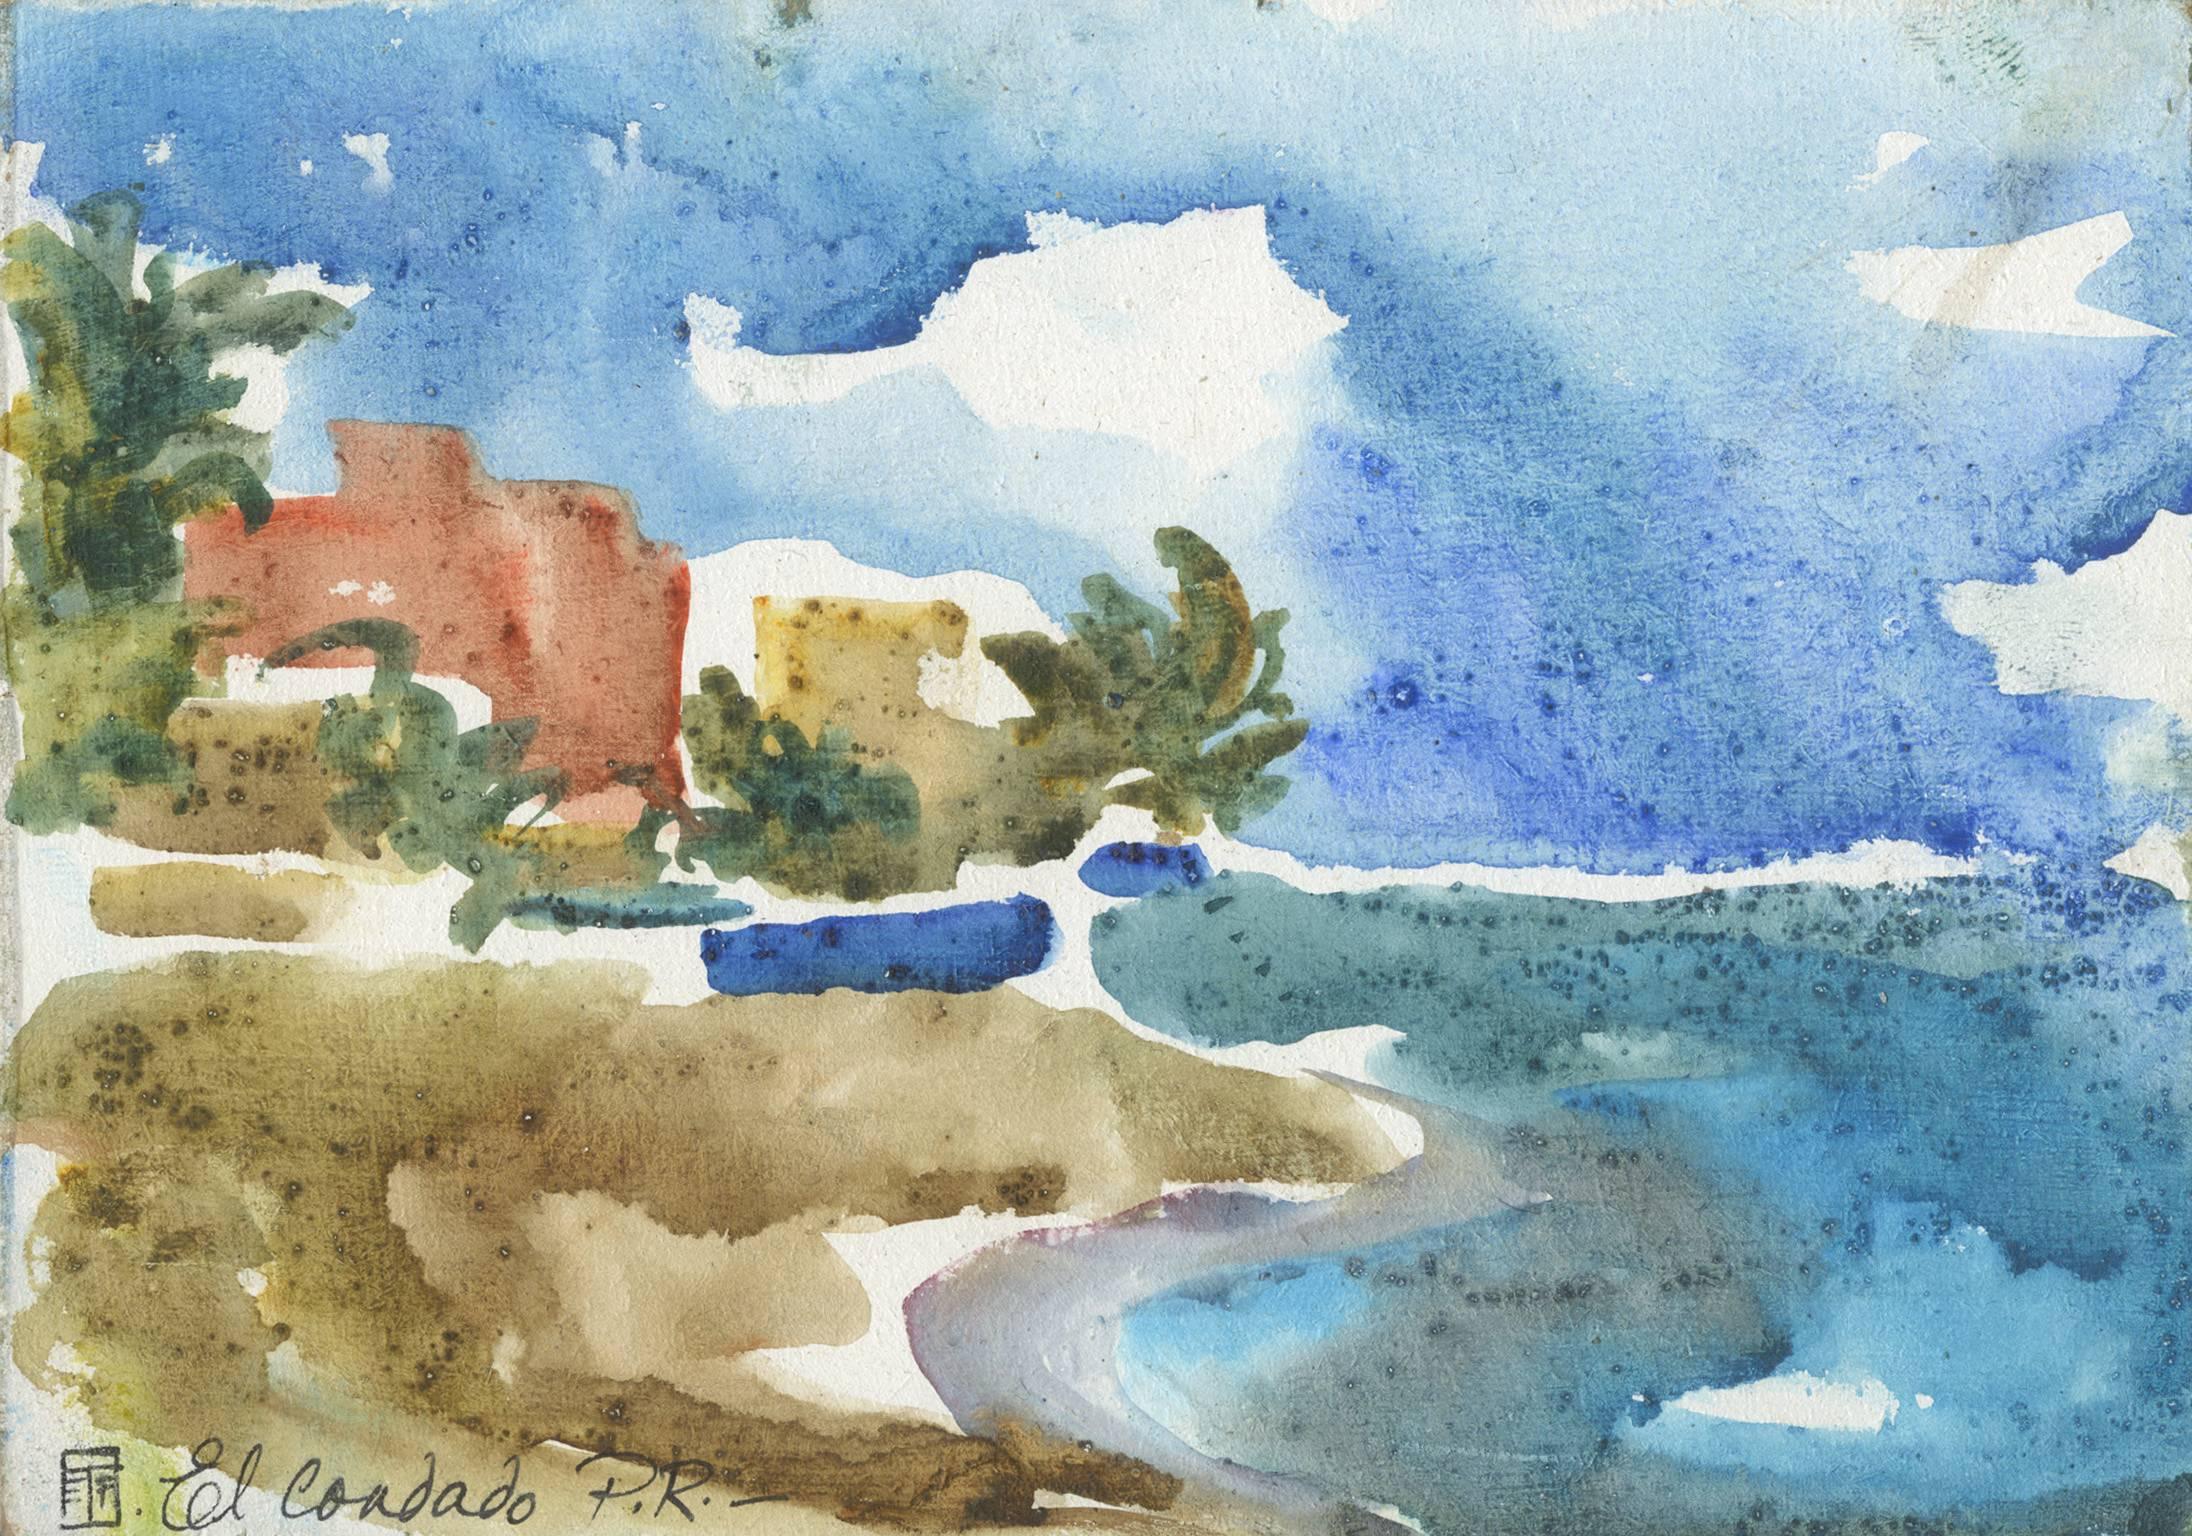 Tracey Padron Landscape Art - "El Condado, P.R." Watercolor Seascape on Board signed by Tracy Padron